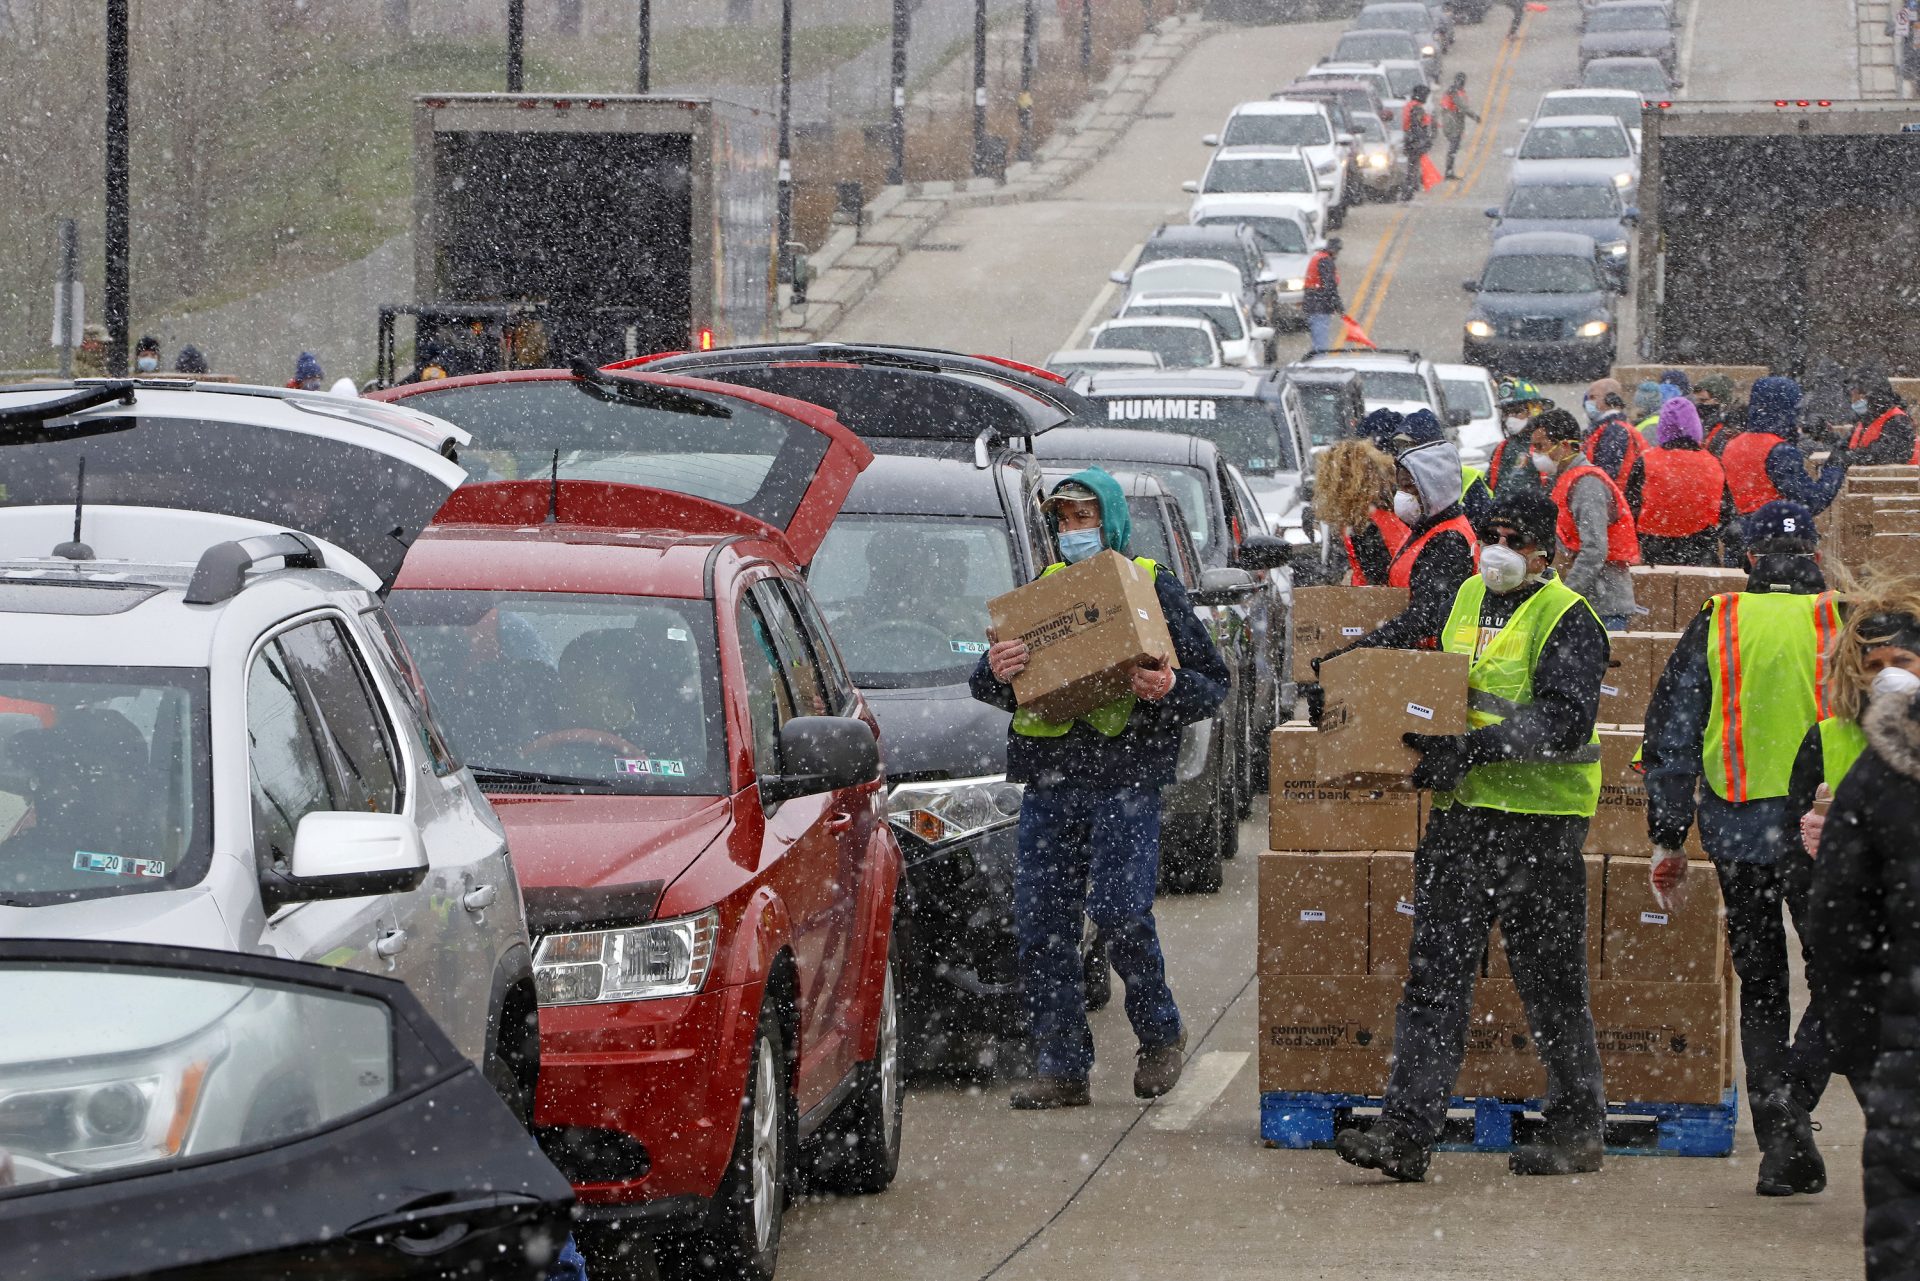 Boxes of food are distributed by the Greater Pittsburgh Community Food Bank, at a drive thru distribution near PPG Arena in downtown Pittsburgh, Friday, April 10, 2020.